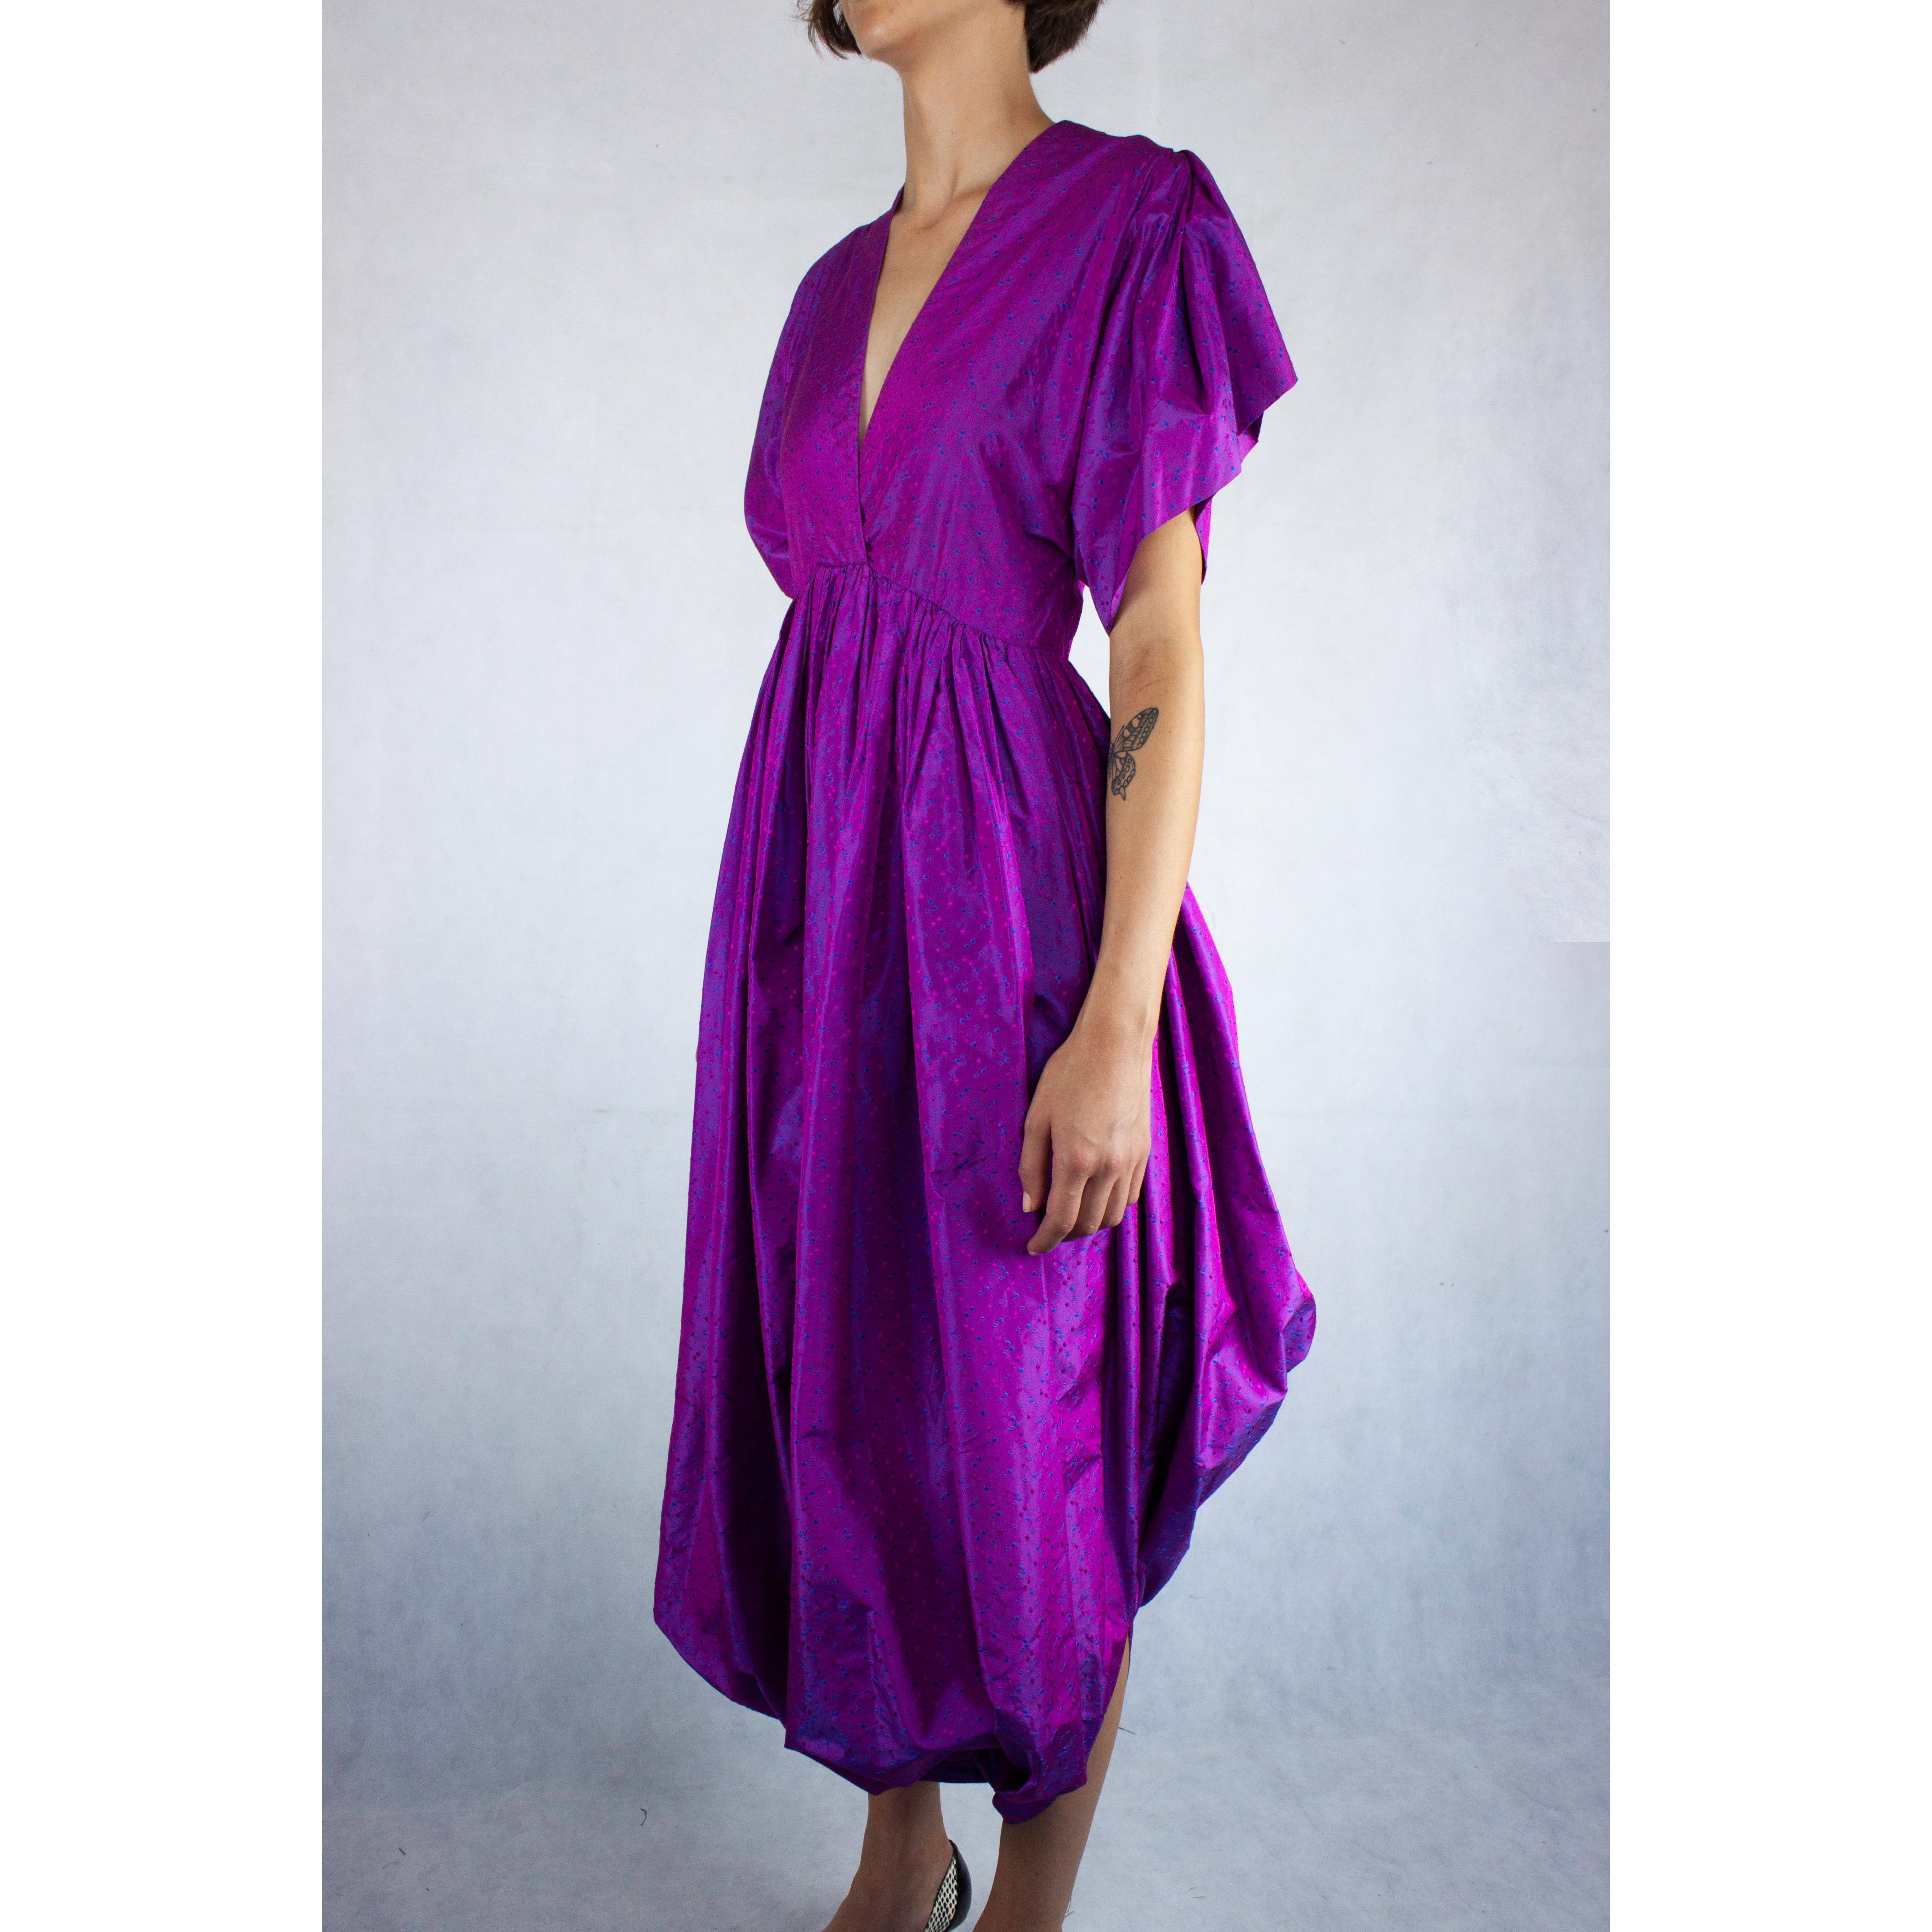 Unlabelled  Madame Grès iridescent lilac silk evening jumpsuit  circa 1970s In Good Condition For Sale In London, GB